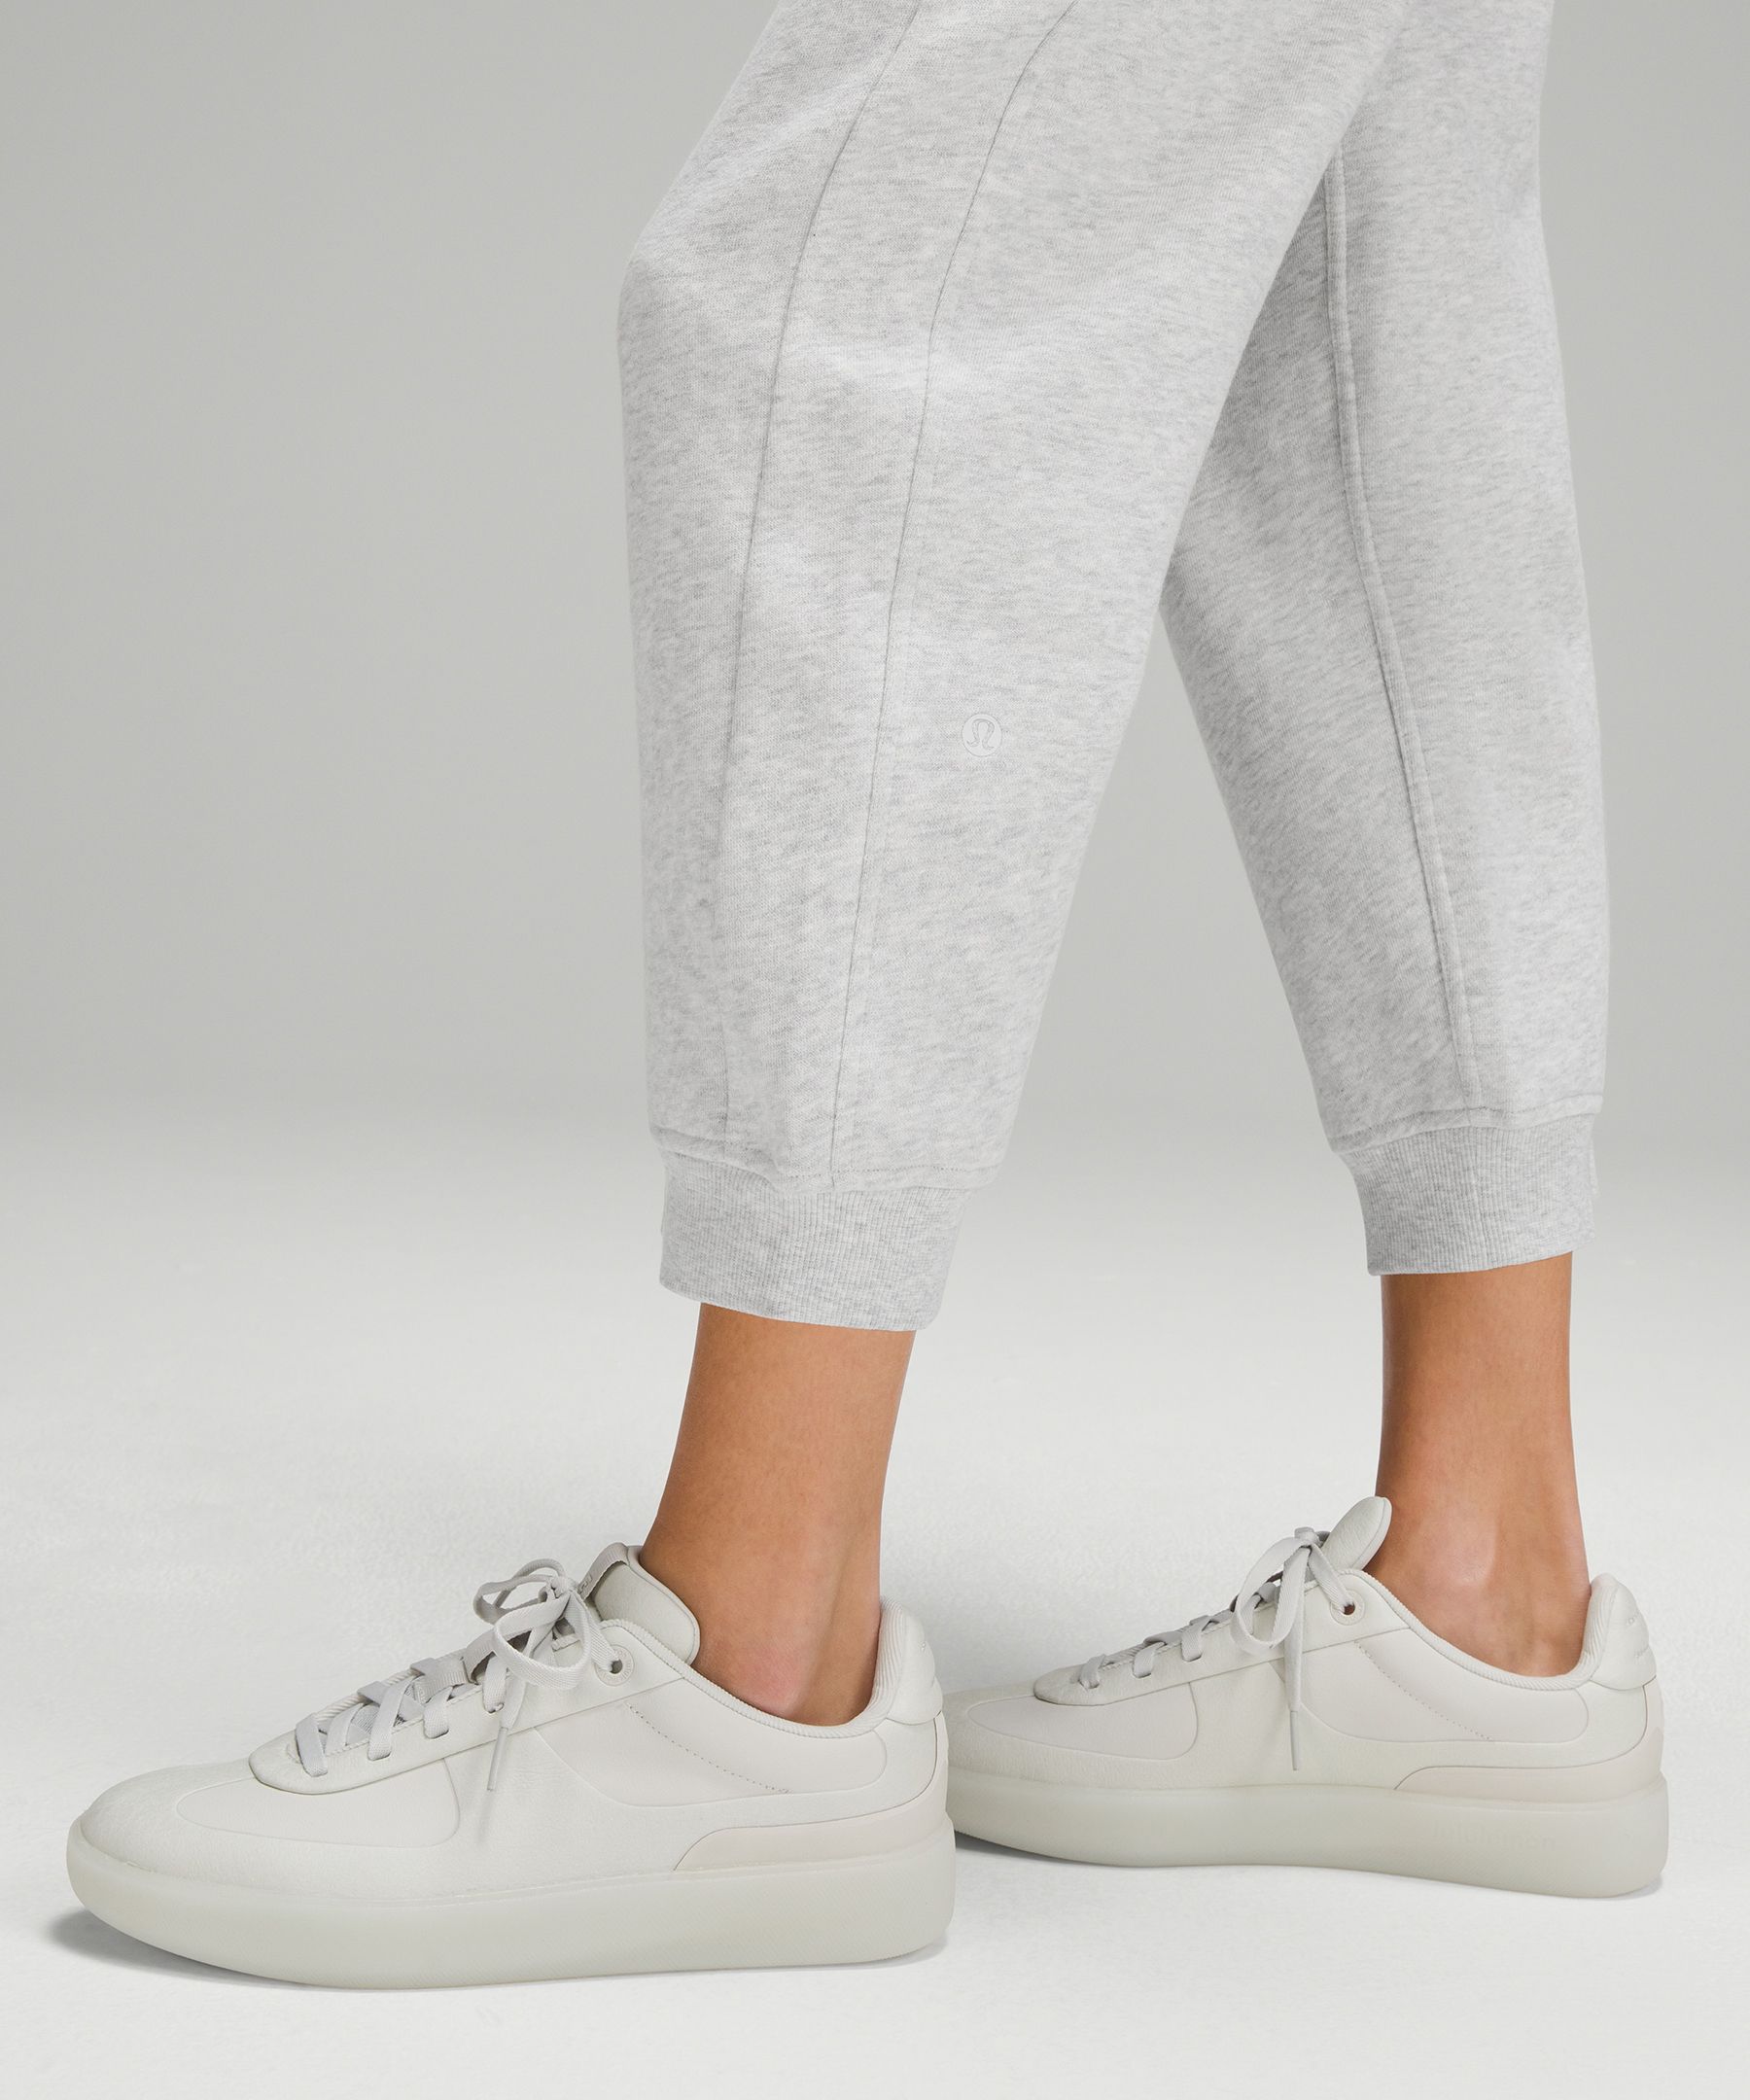 Shop Lululemon Scuba High-rise Cropped Joggers In Heathered Core Ultra Light Grey